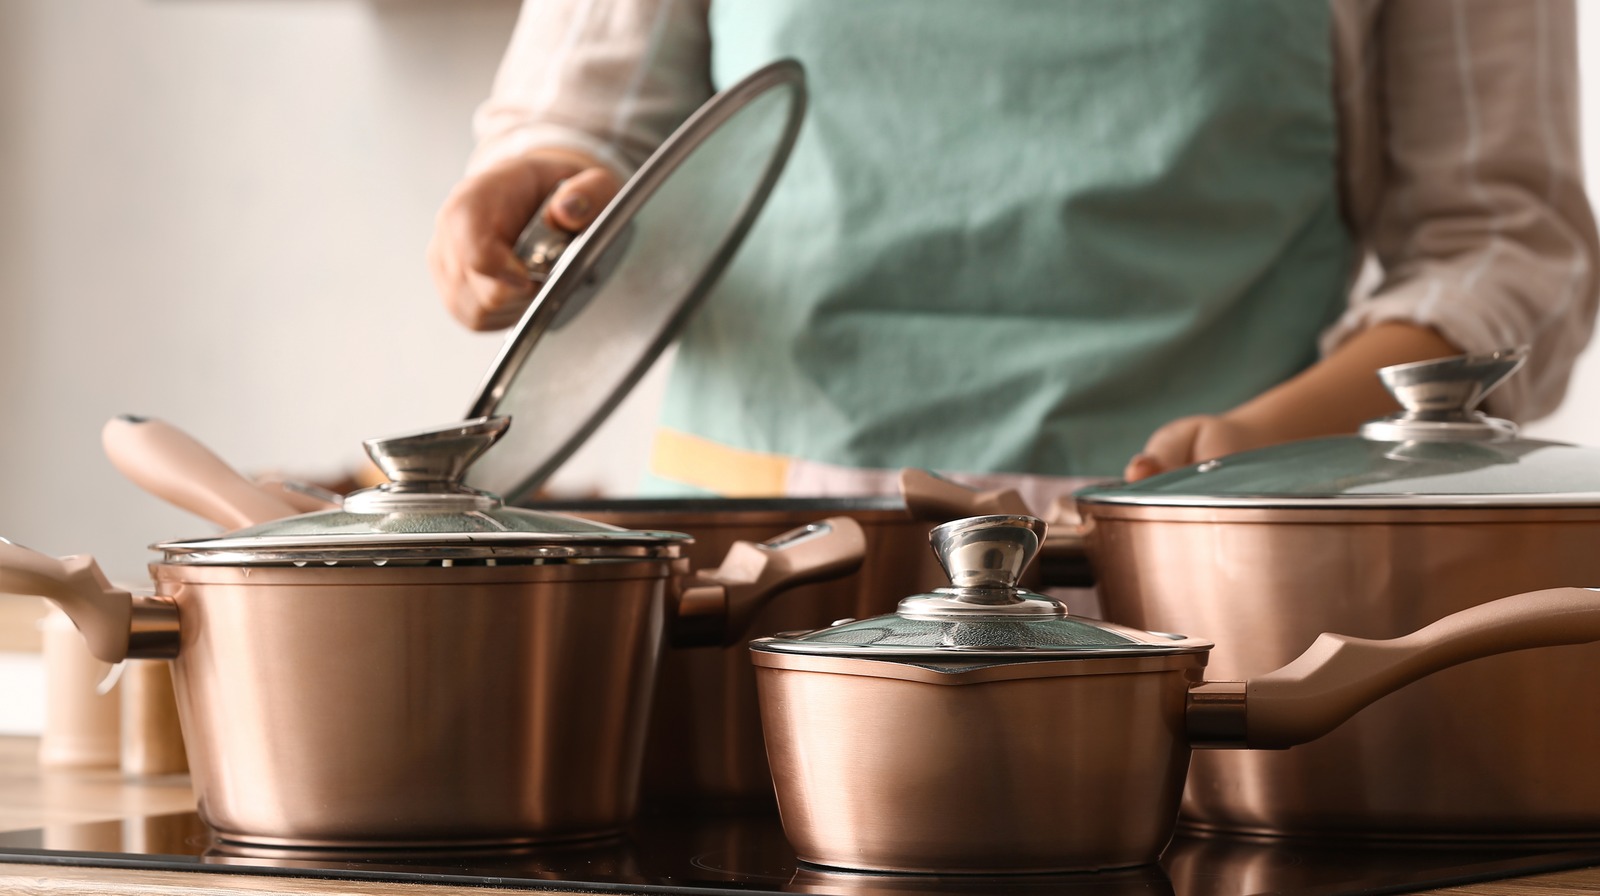 The Best Pot Lid Organizers on the Market